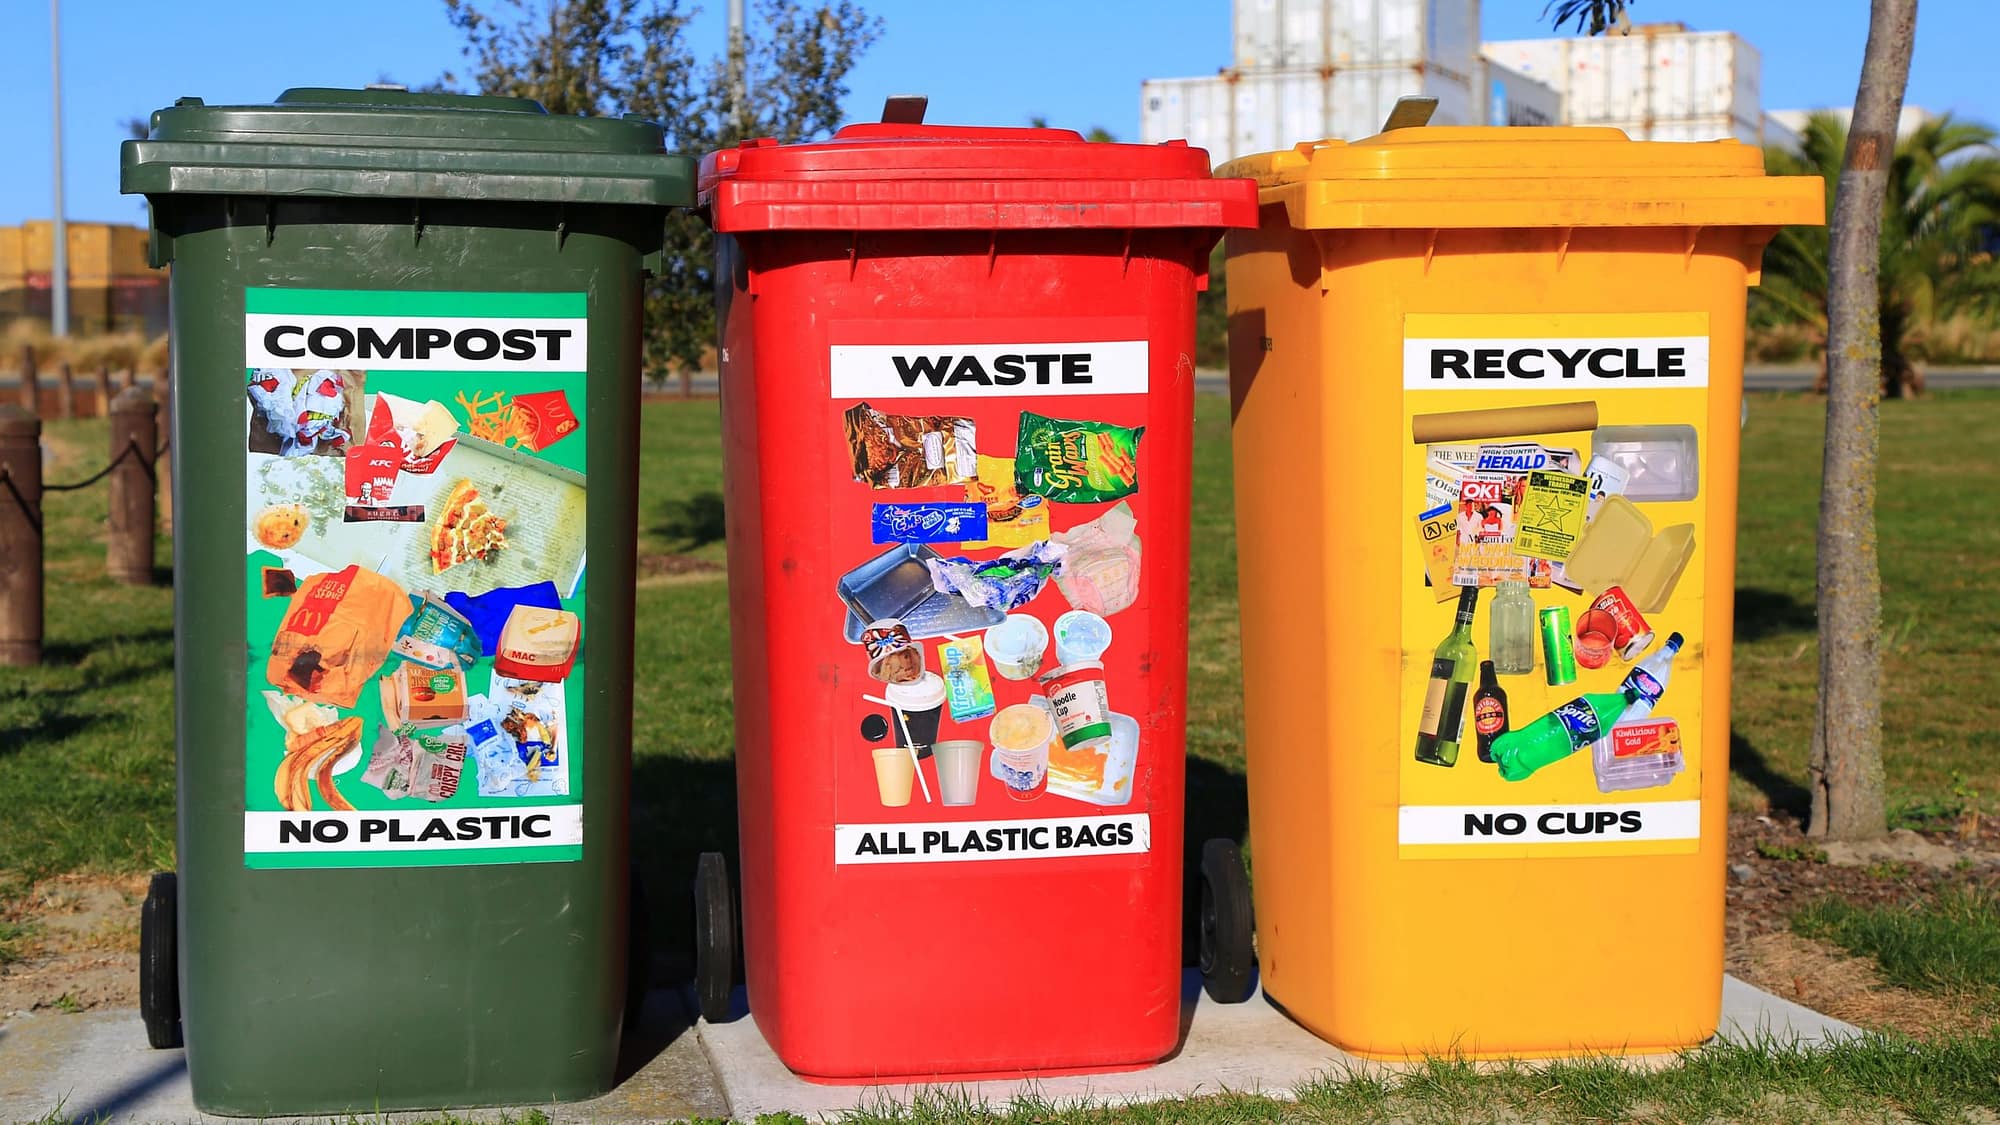 Image: Three bins in a row, a green bin labeled compost, a red bin labeled waste, and a yellow bin labeled recycle